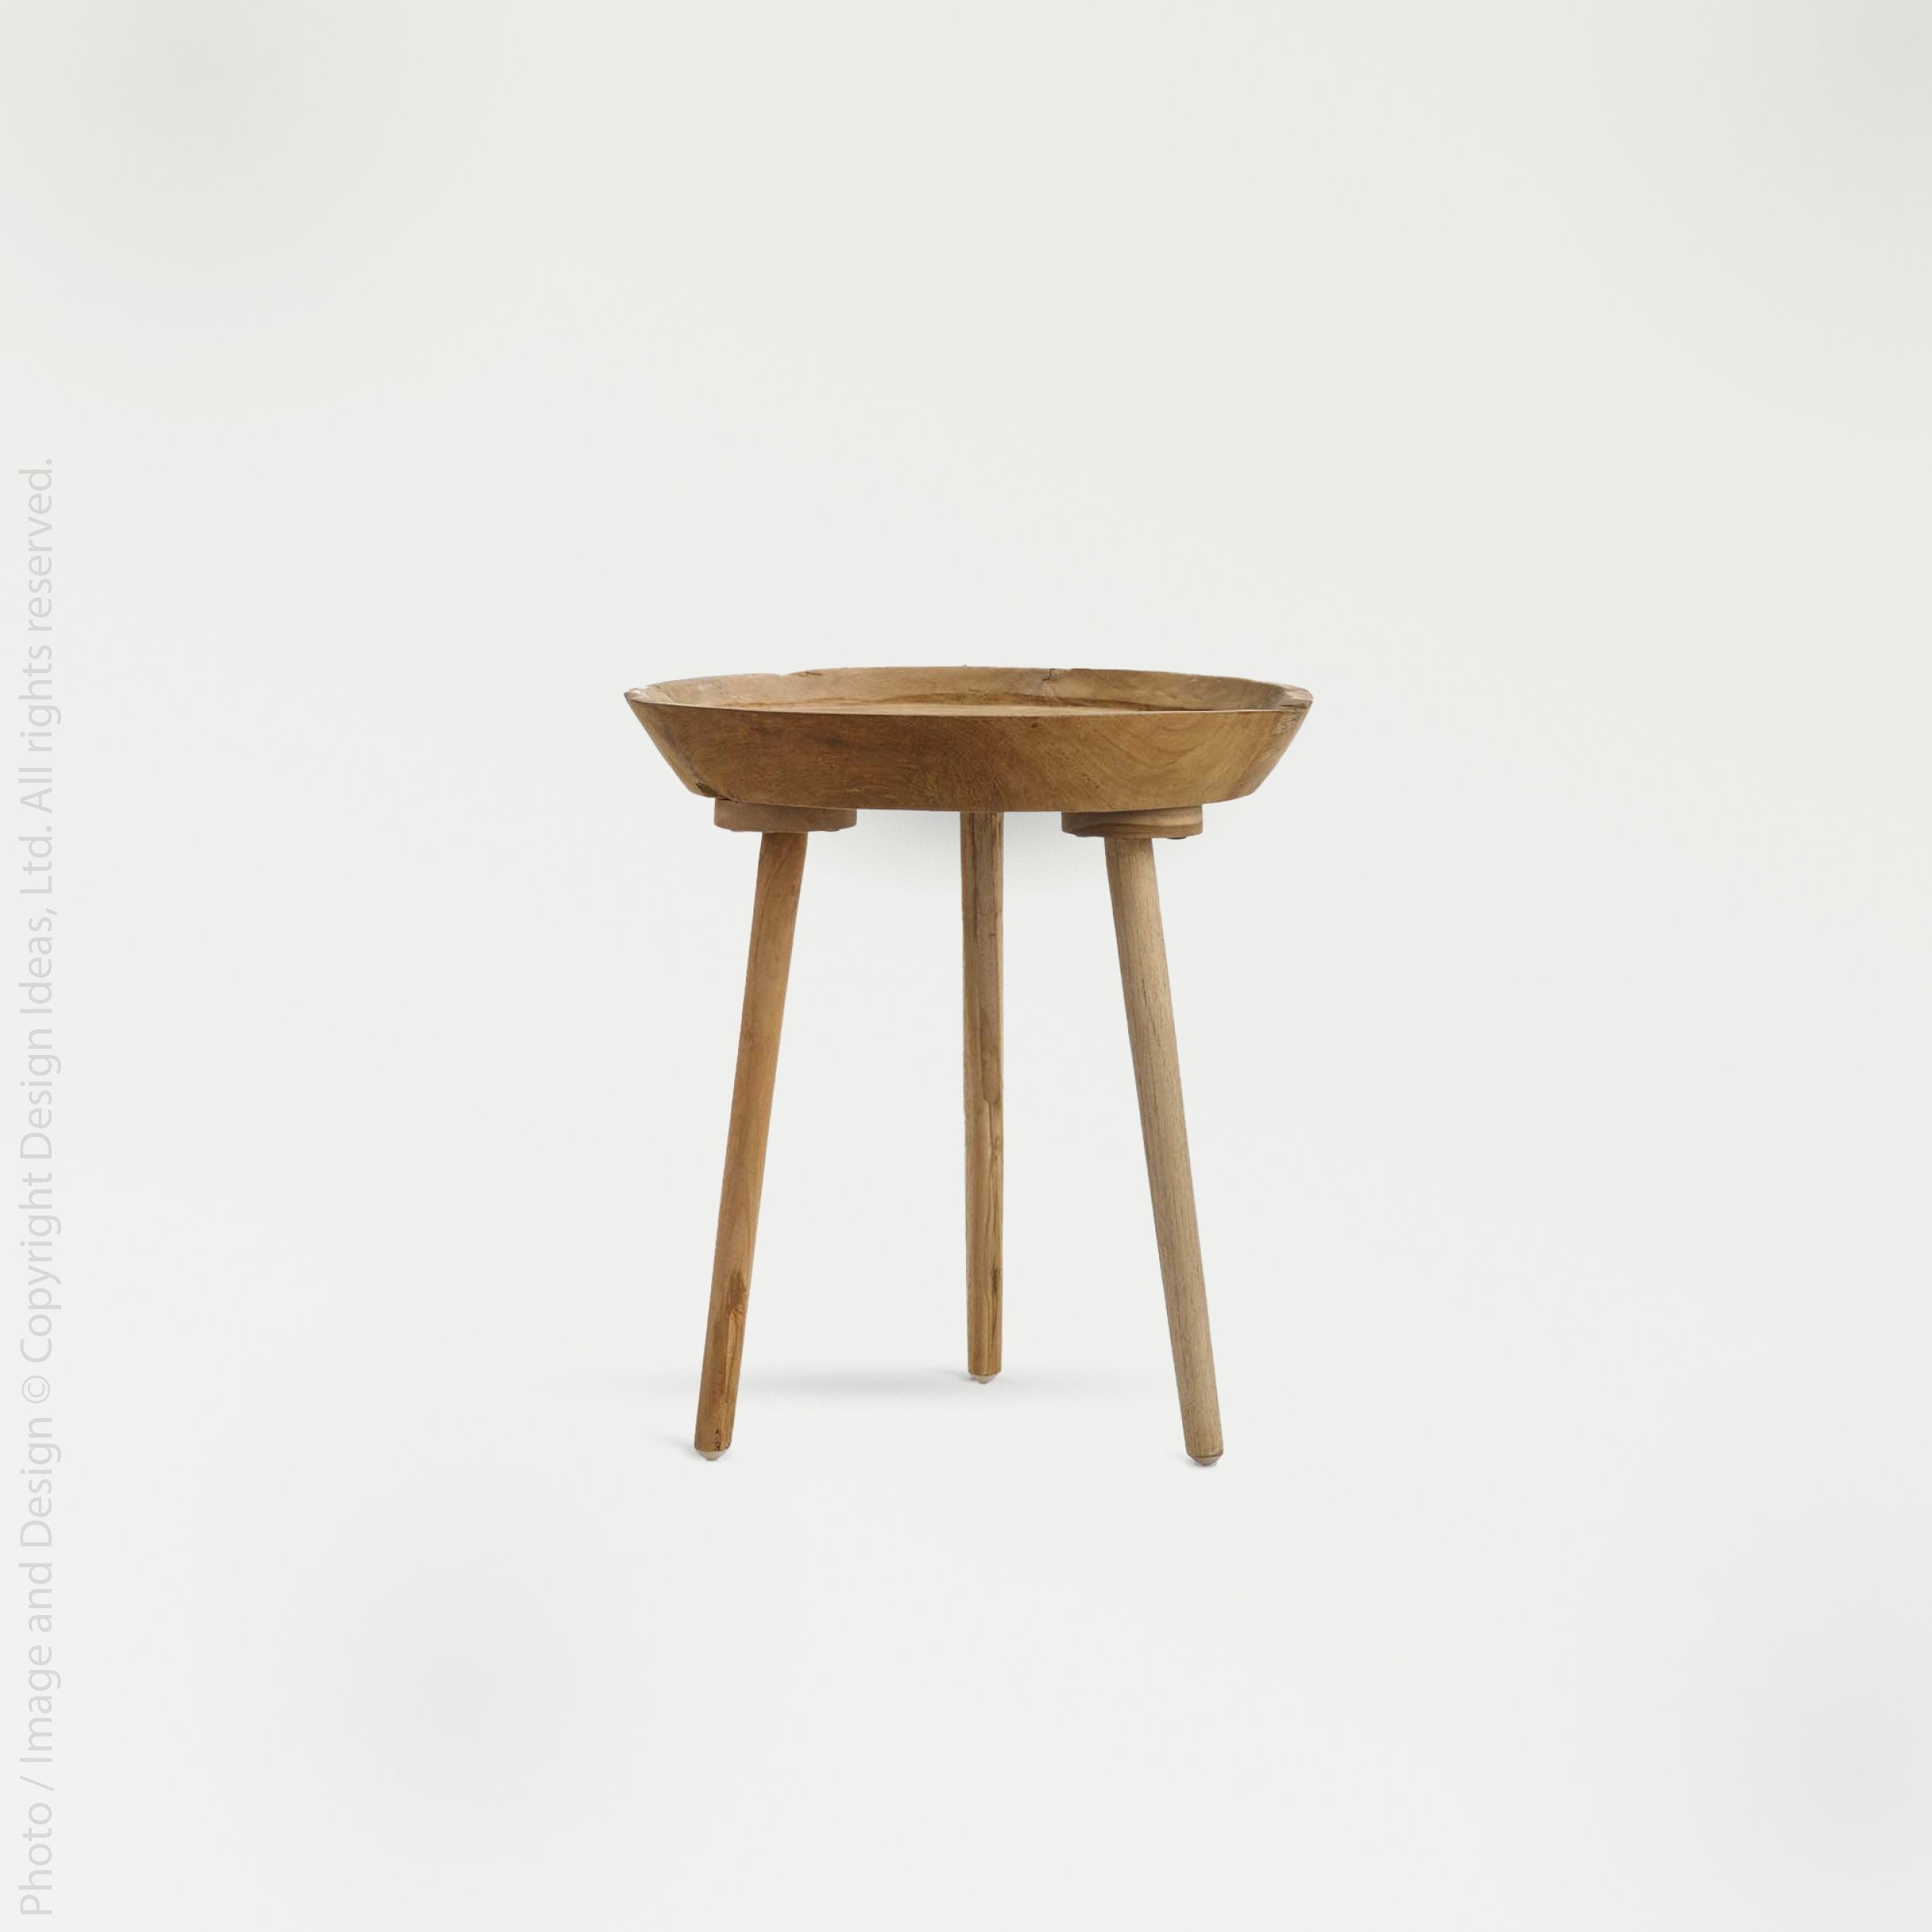 Takara Teak Round Table (Short) - Silver Color | Image 1 | From the Takara Collection | Masterfully assembled with natural teak for long lasting use | This table is sustainably sourced | Available in natural color | texxture home